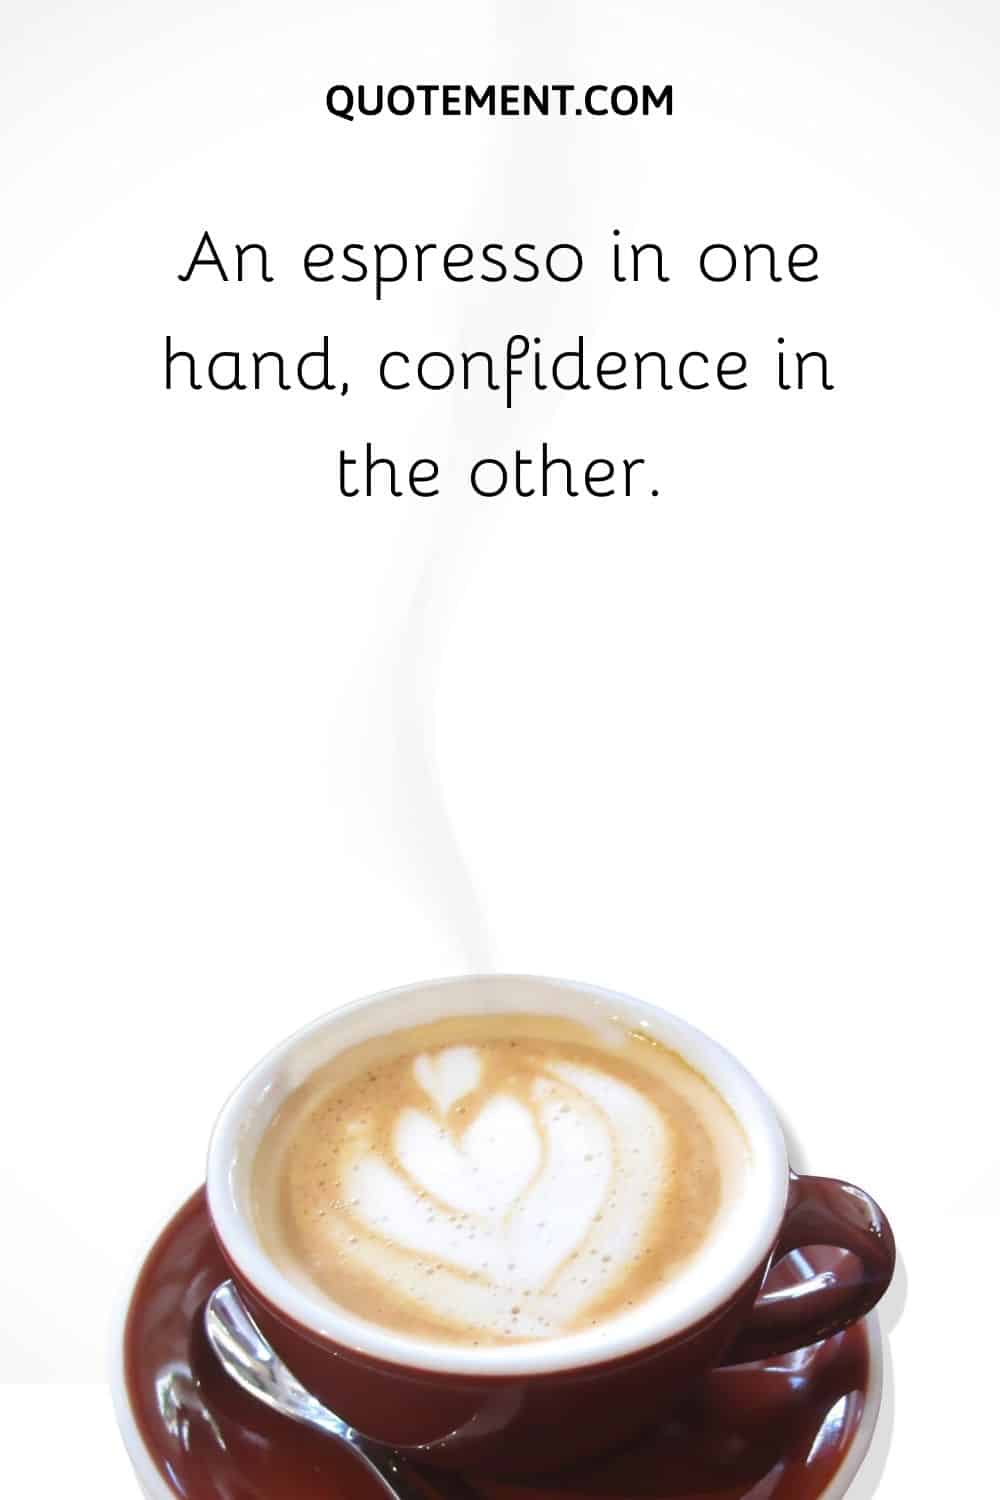 An espresso in one hand, confidence in the other